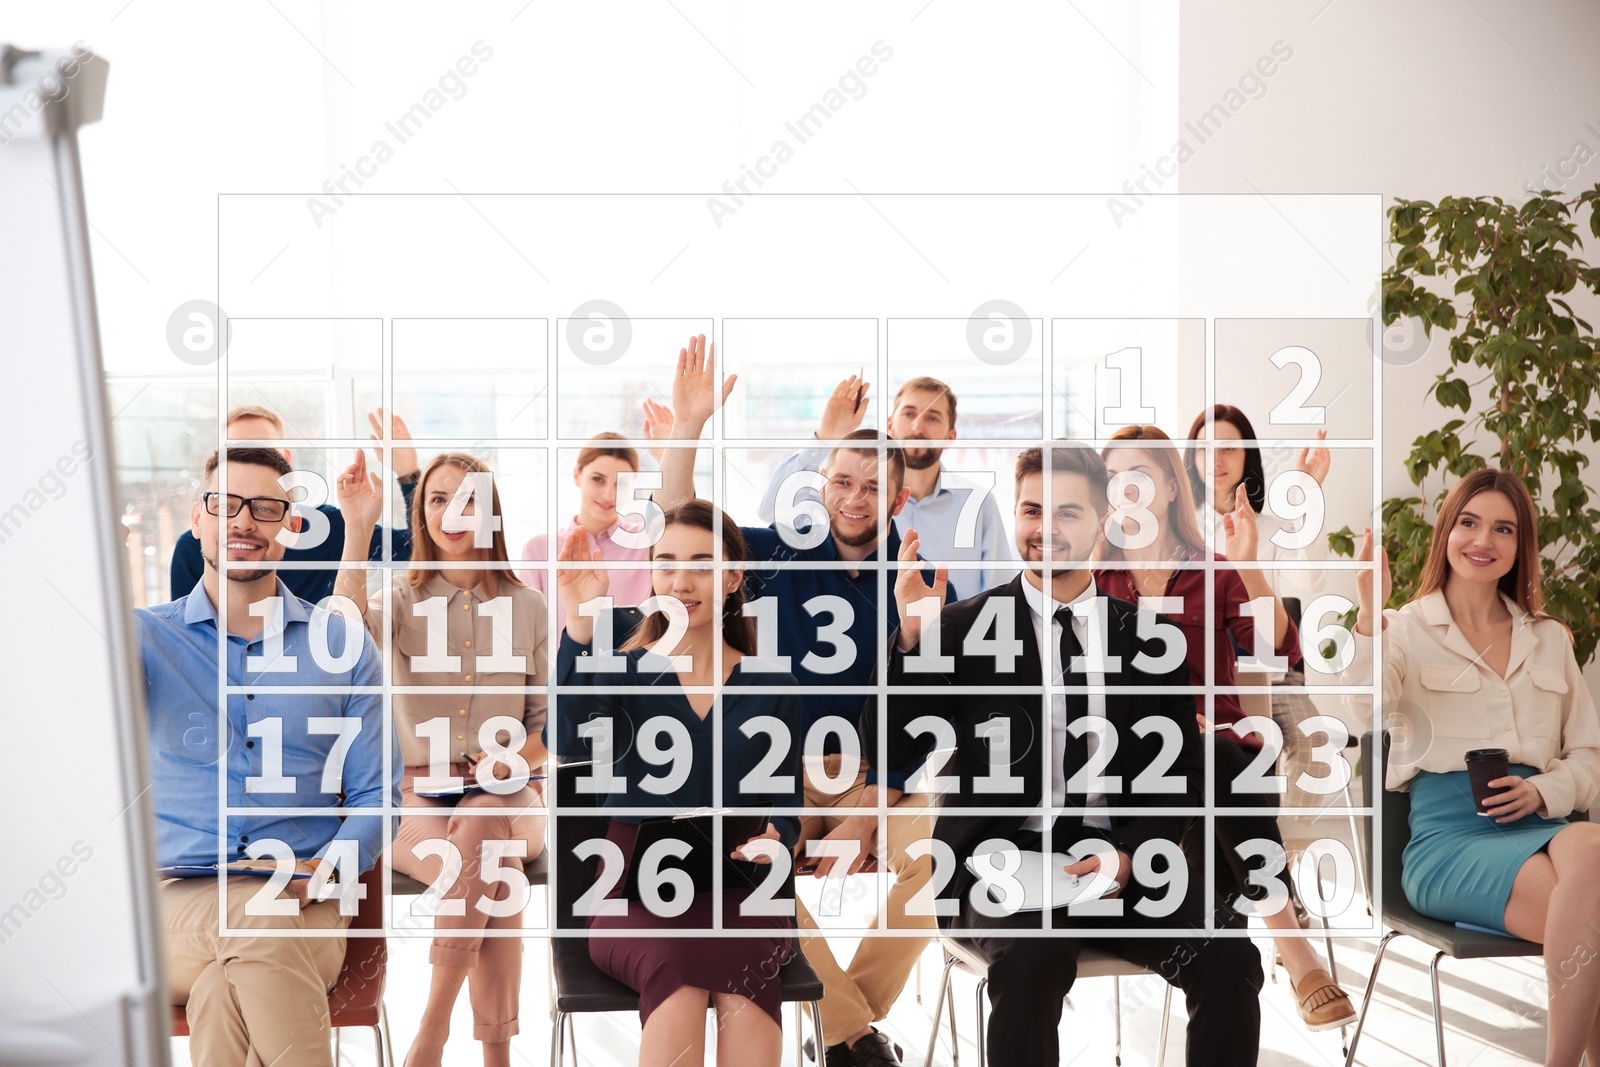 Image of Calendar and people having business meeting indoors